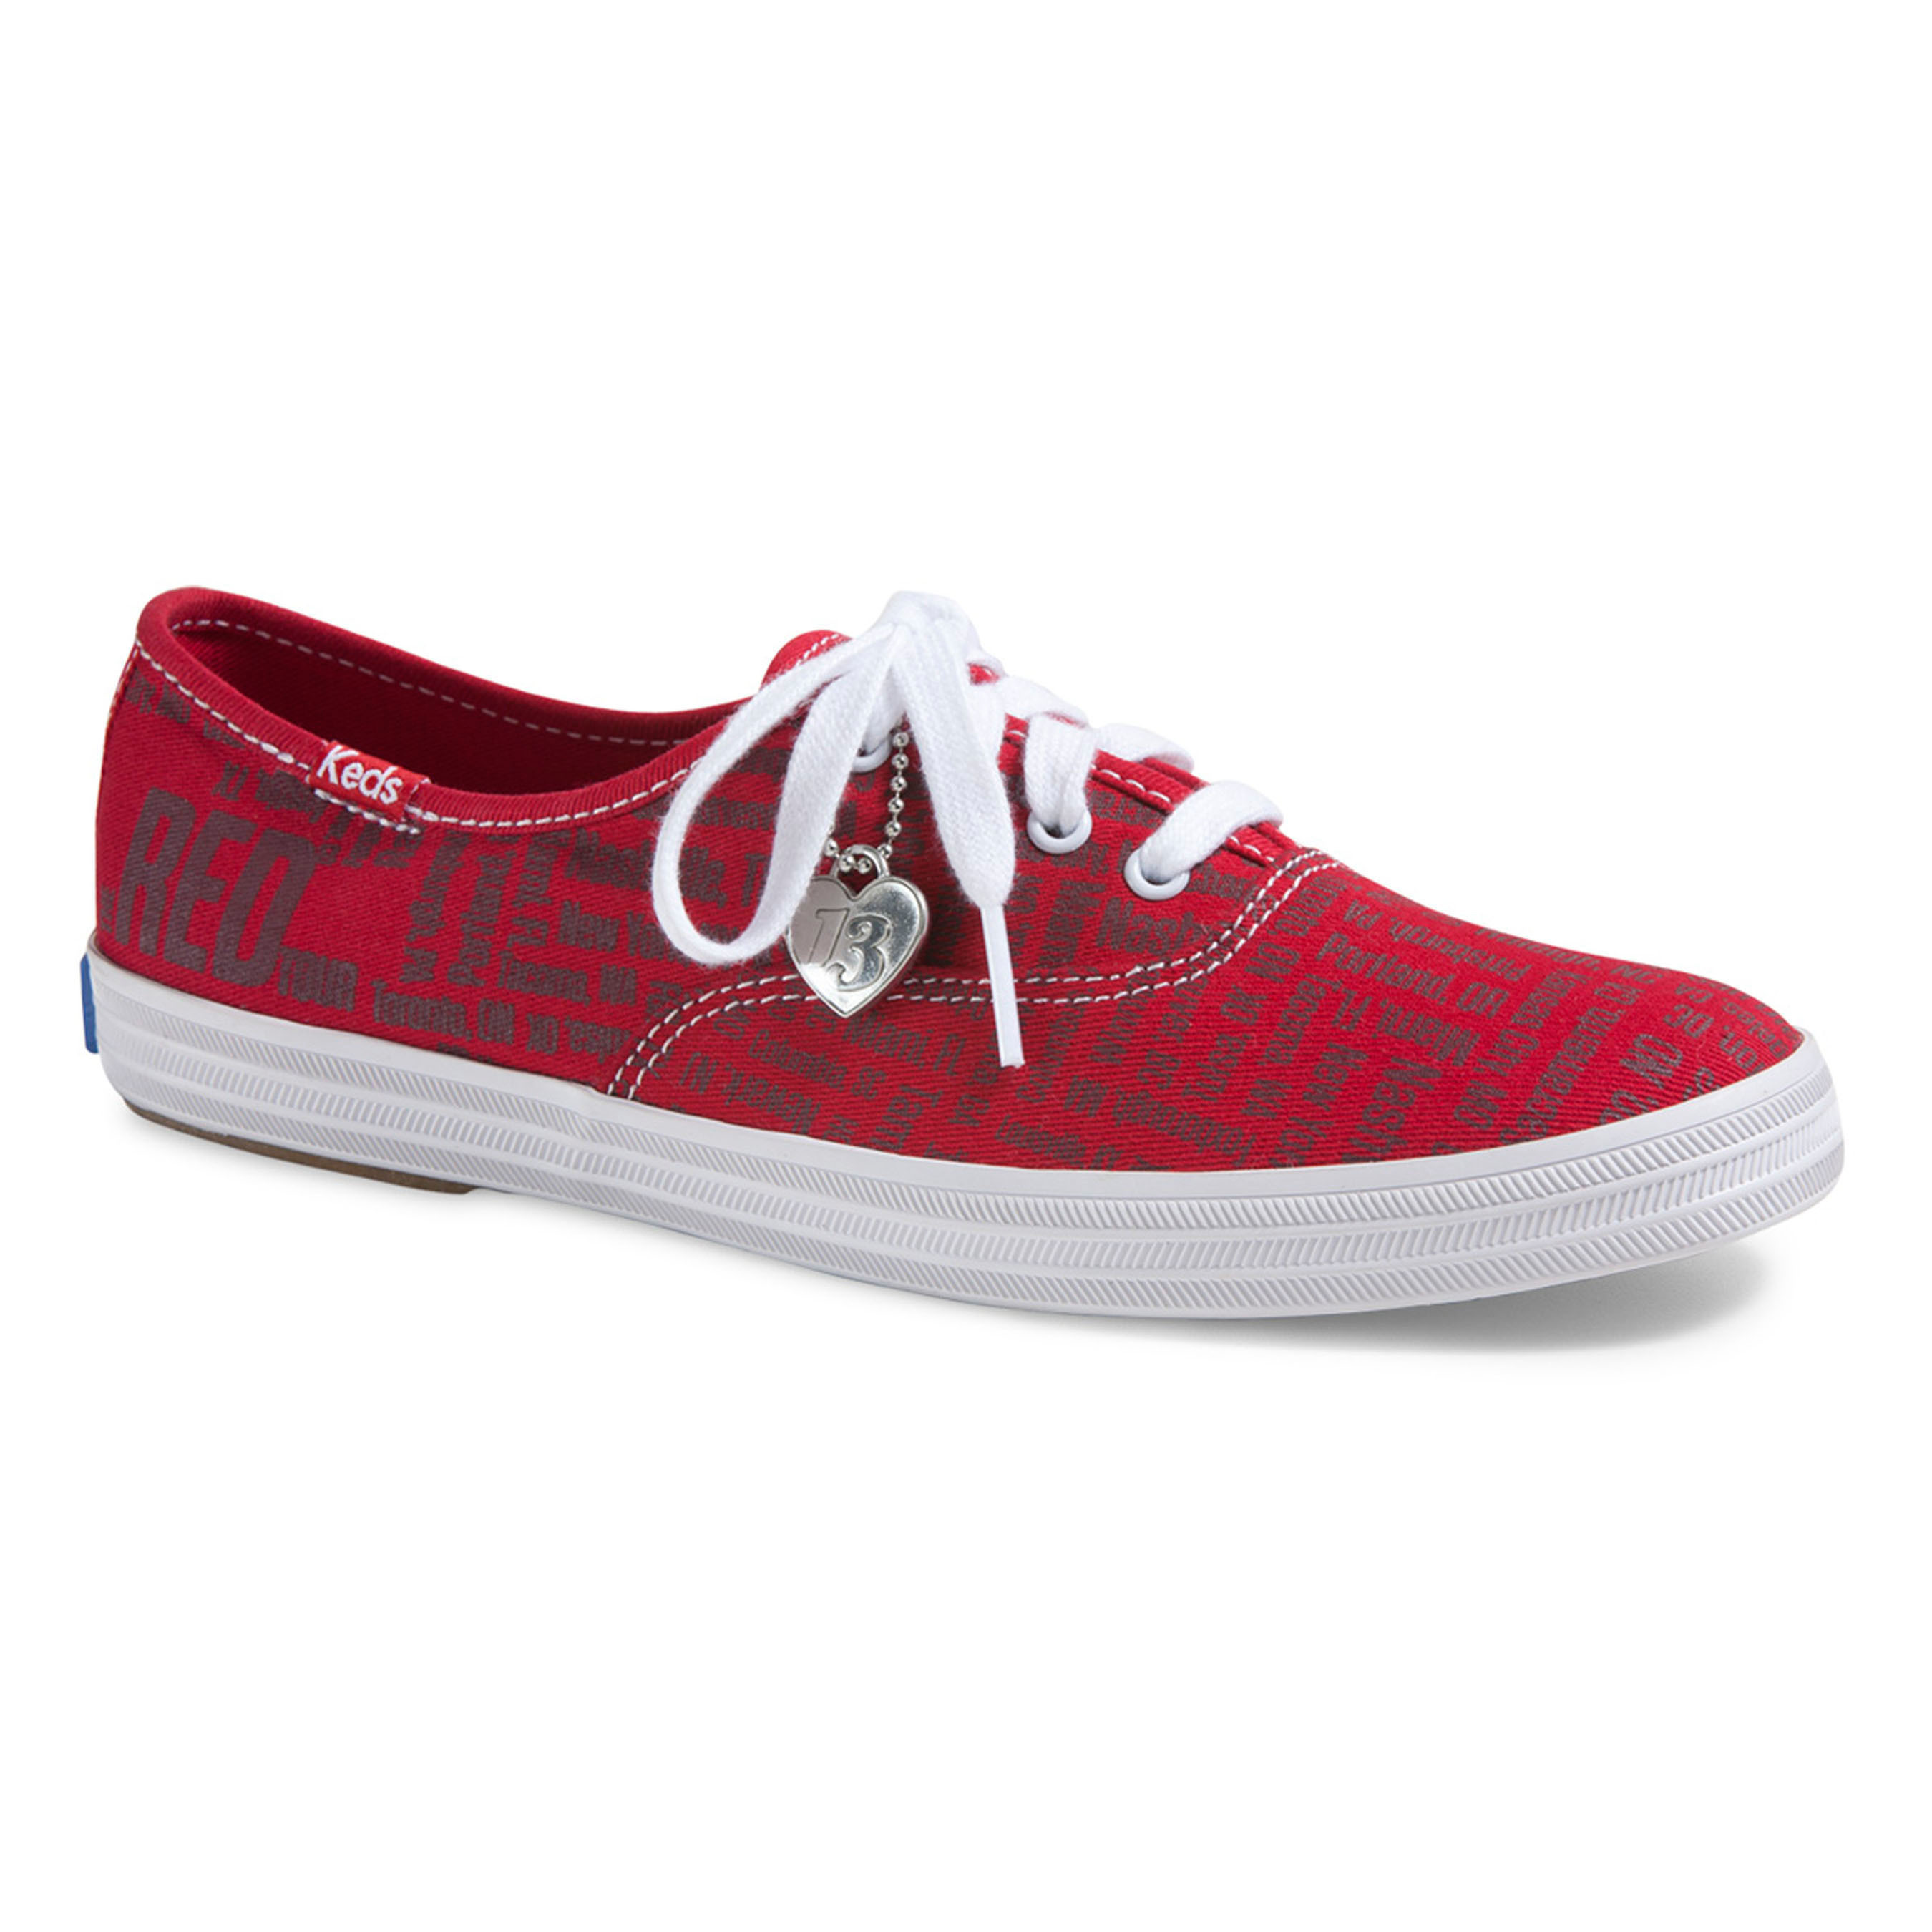 Keds® Announces Sponsorship Of Taylor Swift's 'RED Tour'; Releases Limited Edition Sneaker